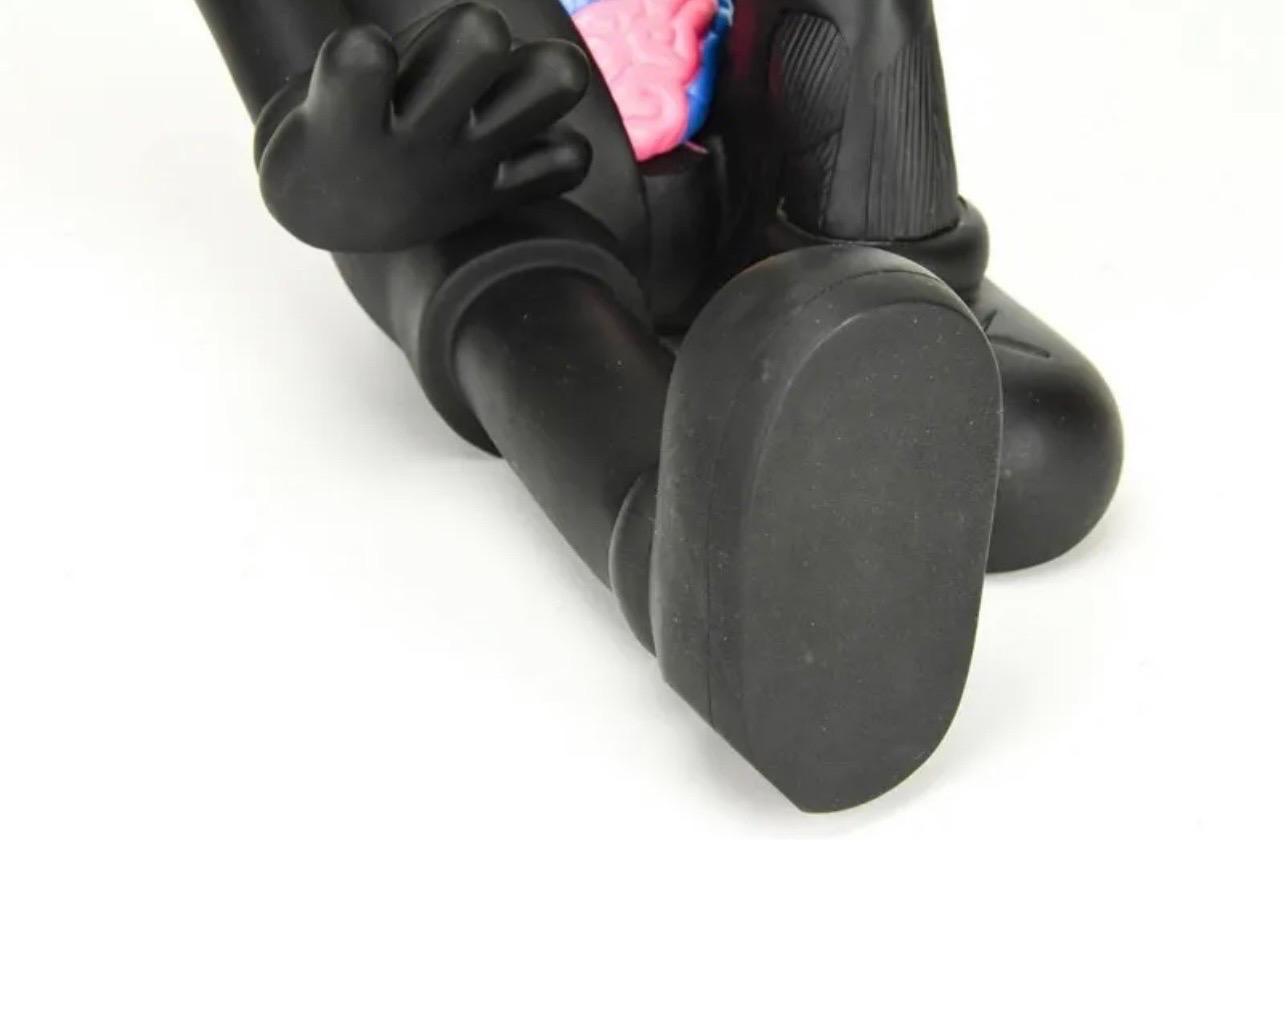 Wonderful Modern Kaws Seated Black Dissected Flayed Companion 2013 Sculpture In Excellent Condition For Sale In Roslyn, NY